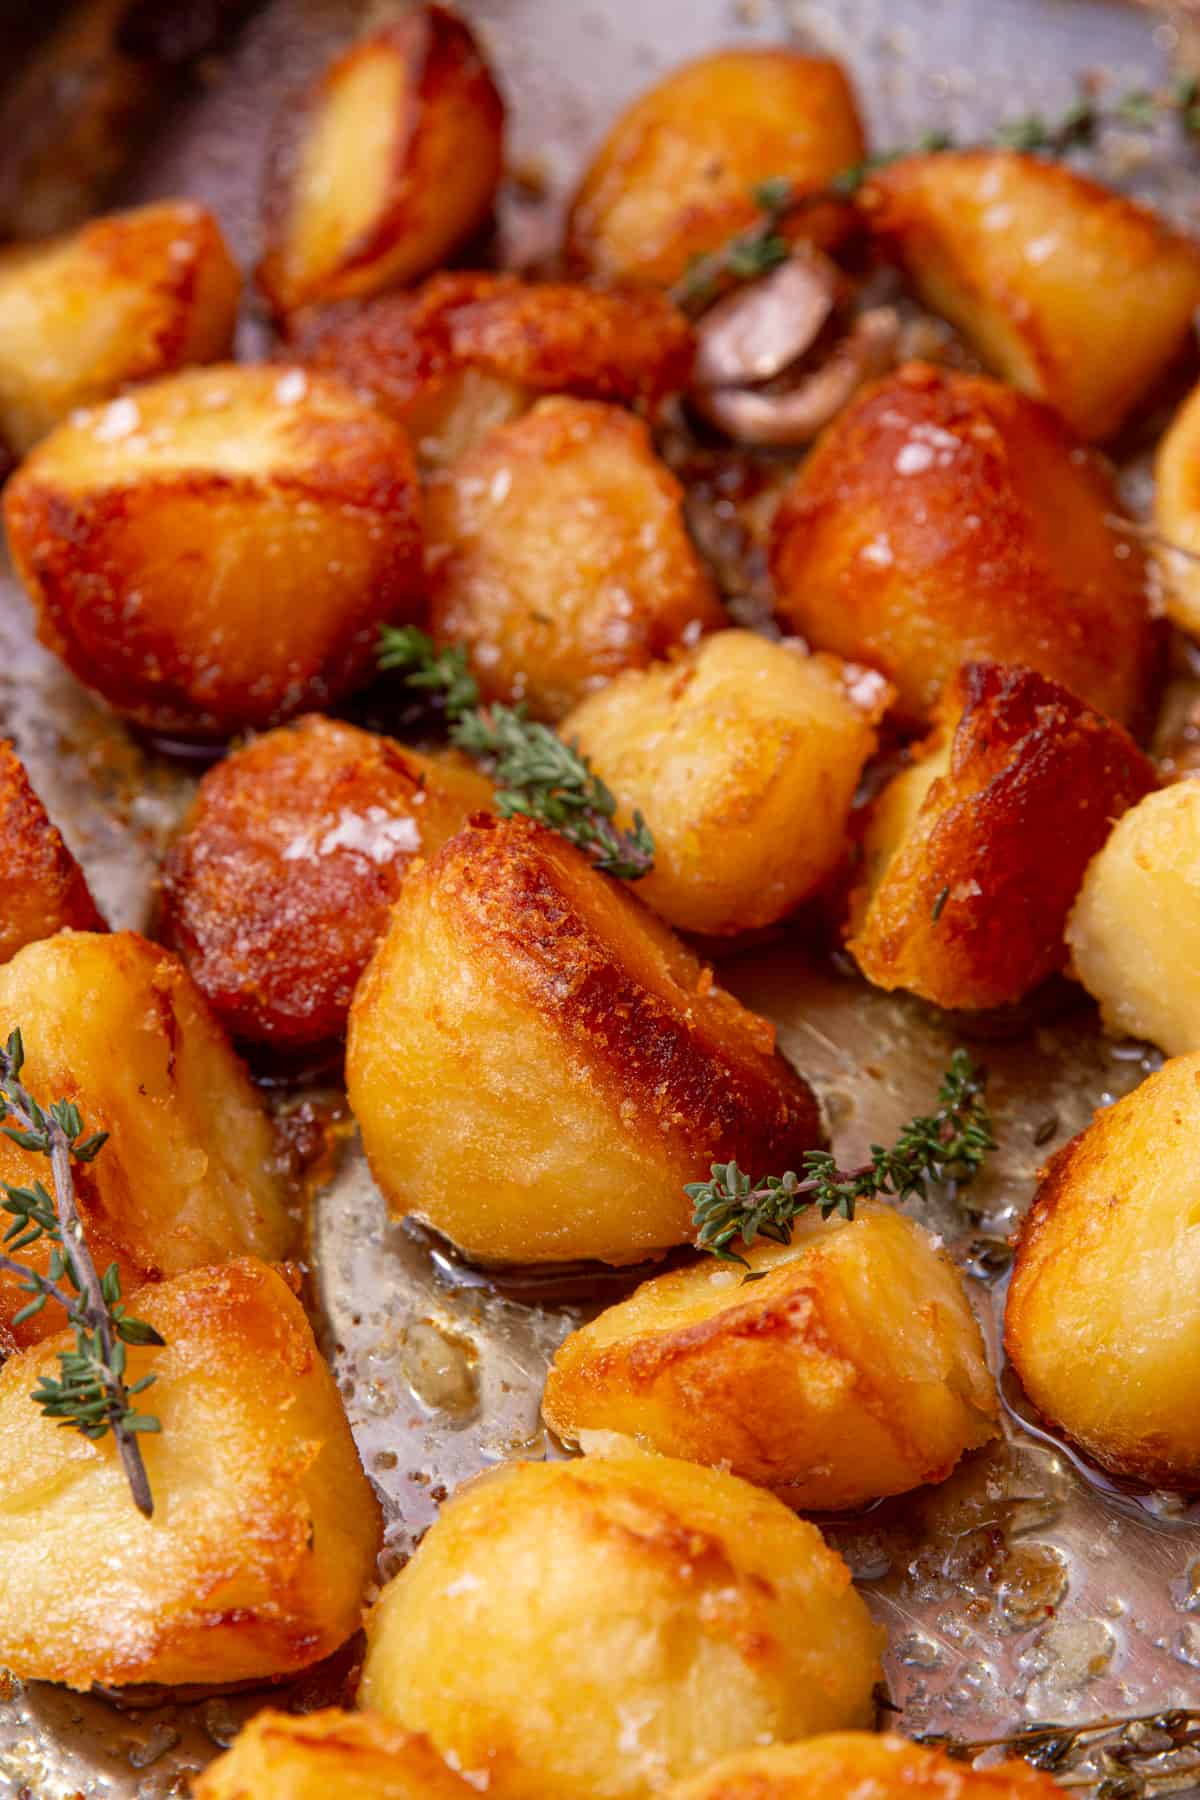 Golden browned roast potatoes on a baking tray with frswsh herbs, salt and garlic.